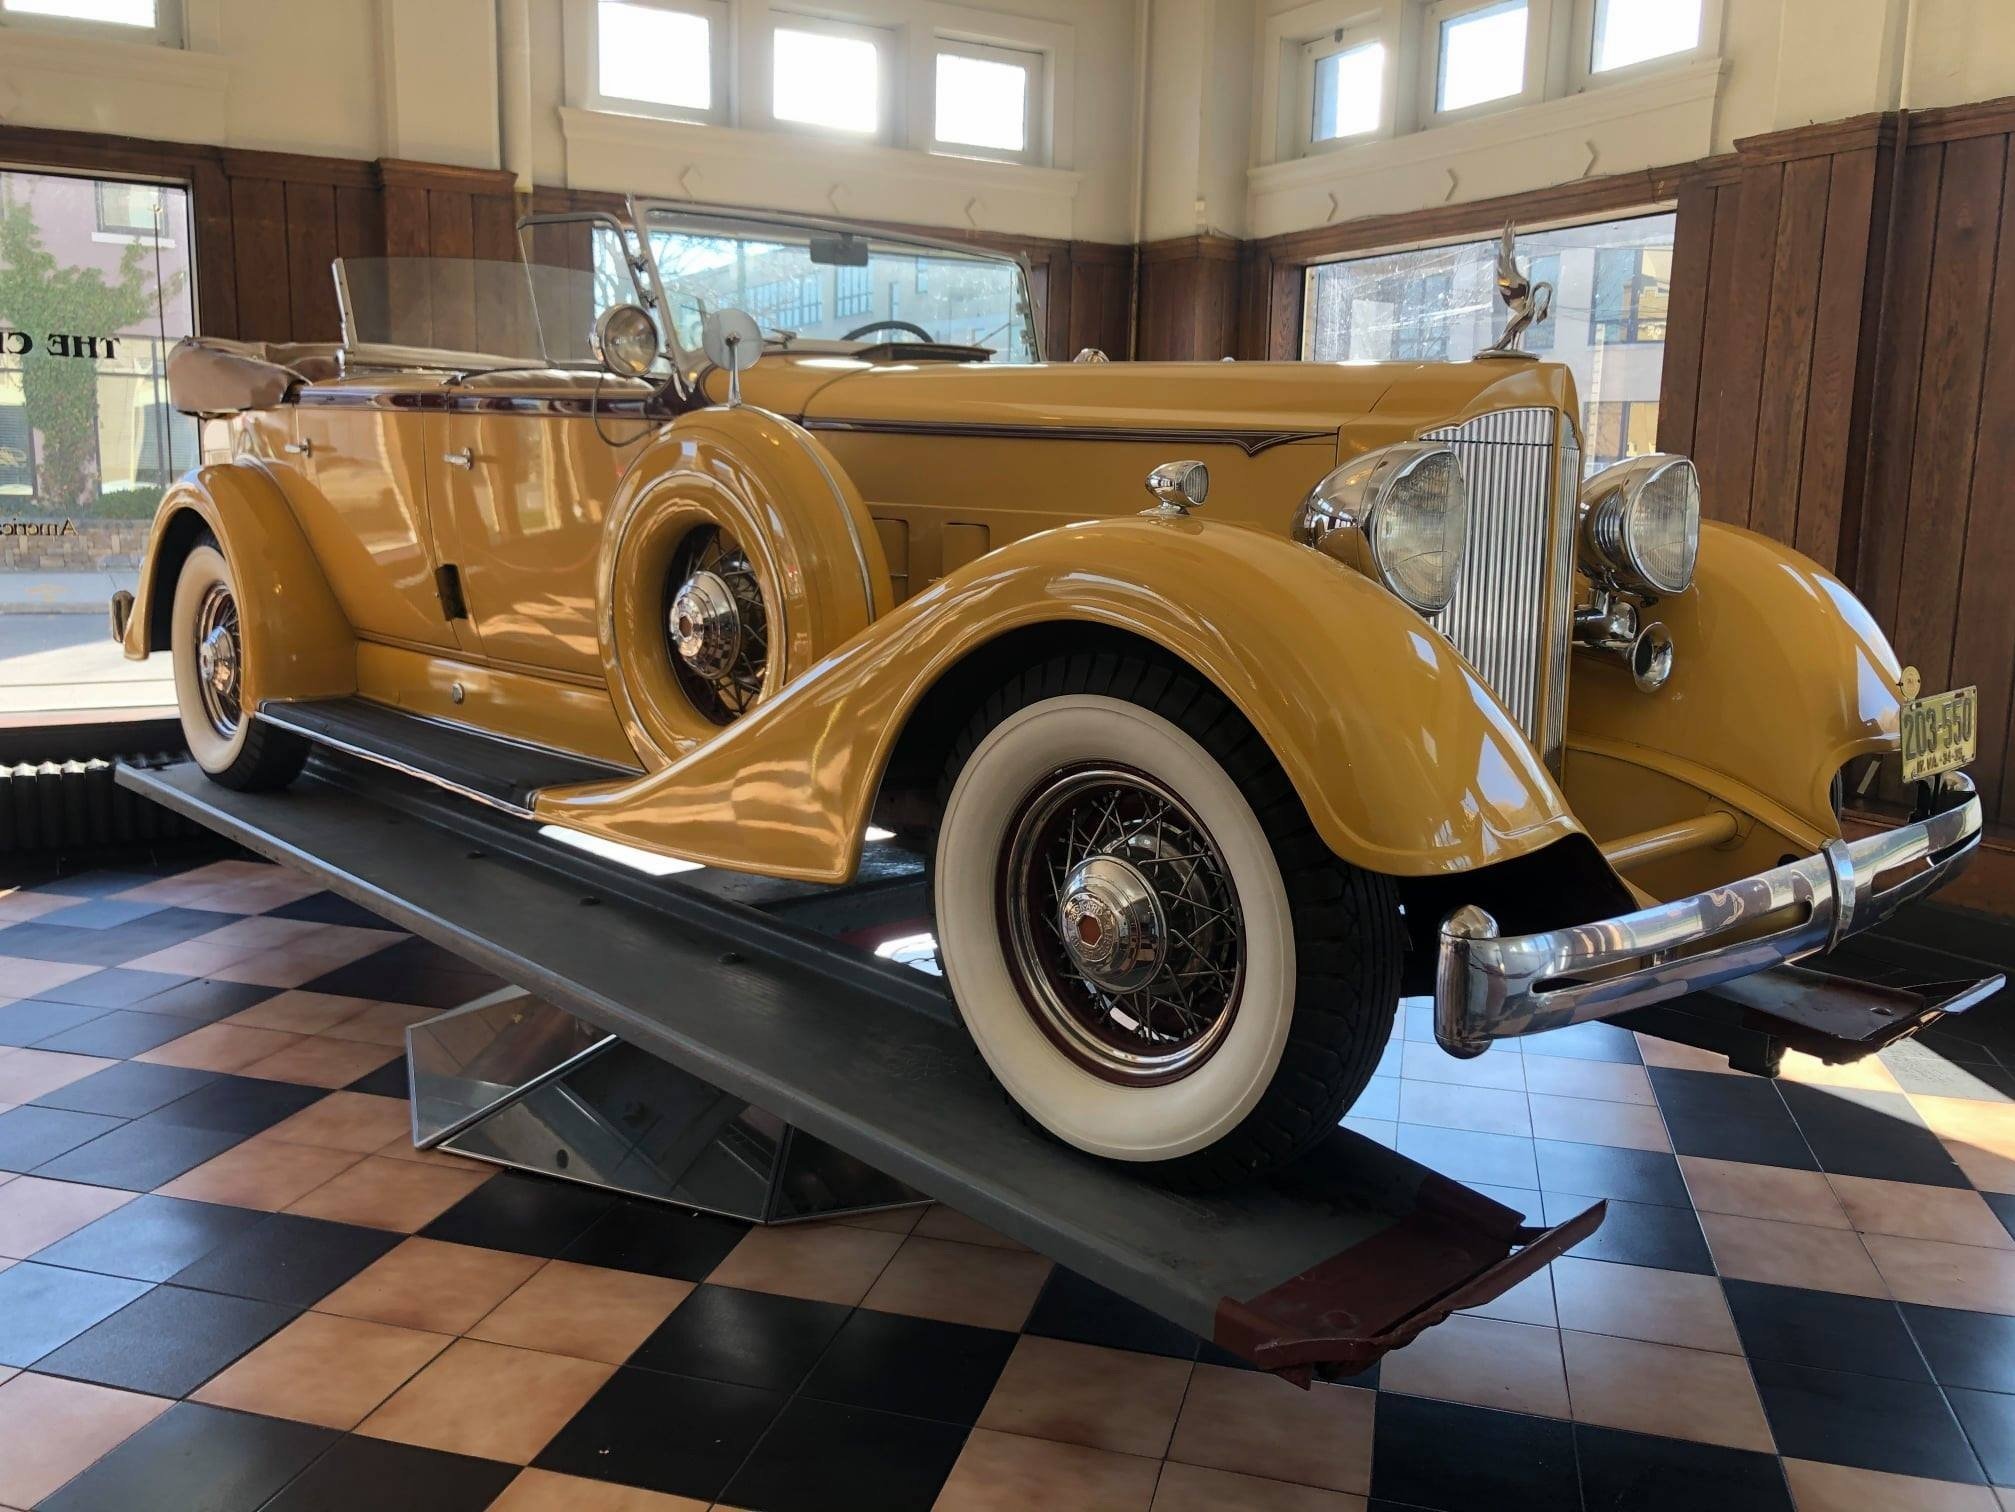 America's Packard Museum - The Citizens Motorcar Co